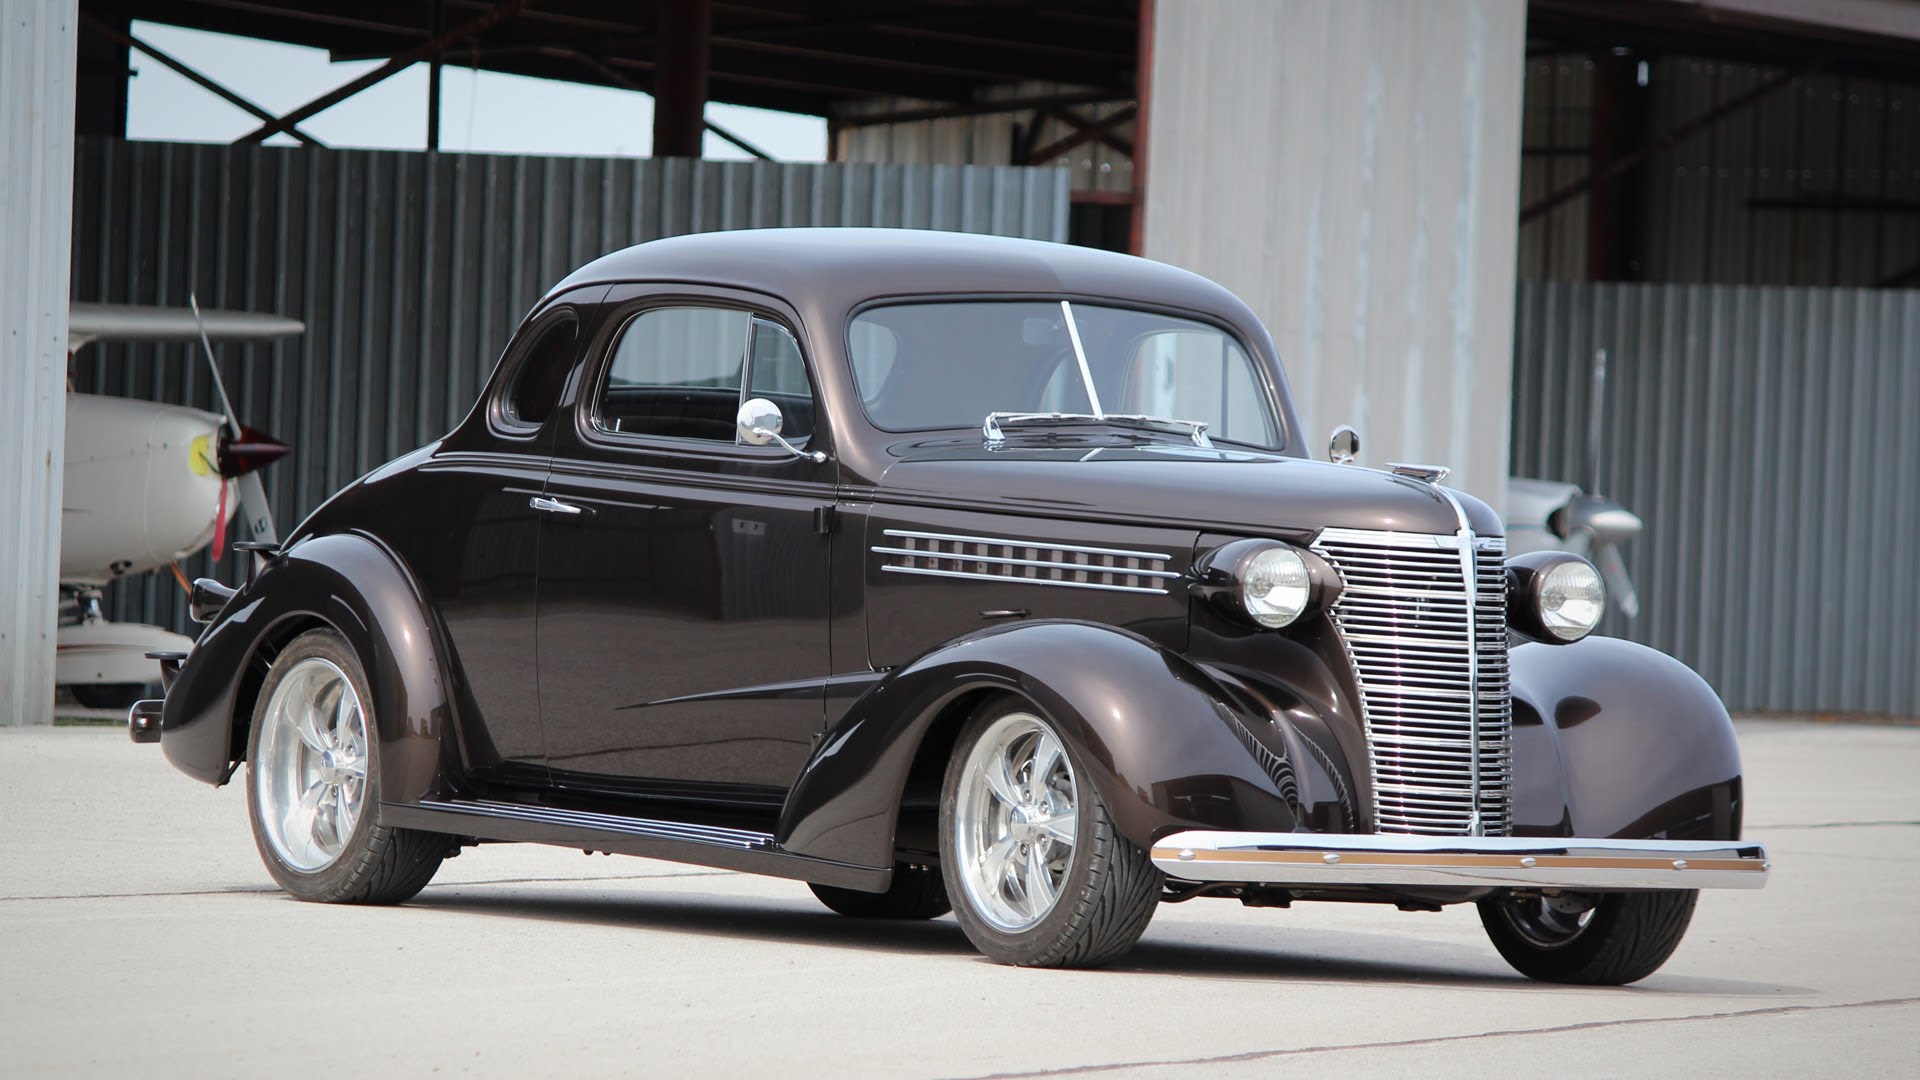 Muscle Rodz: '38 Chevy Coupe - YouTube